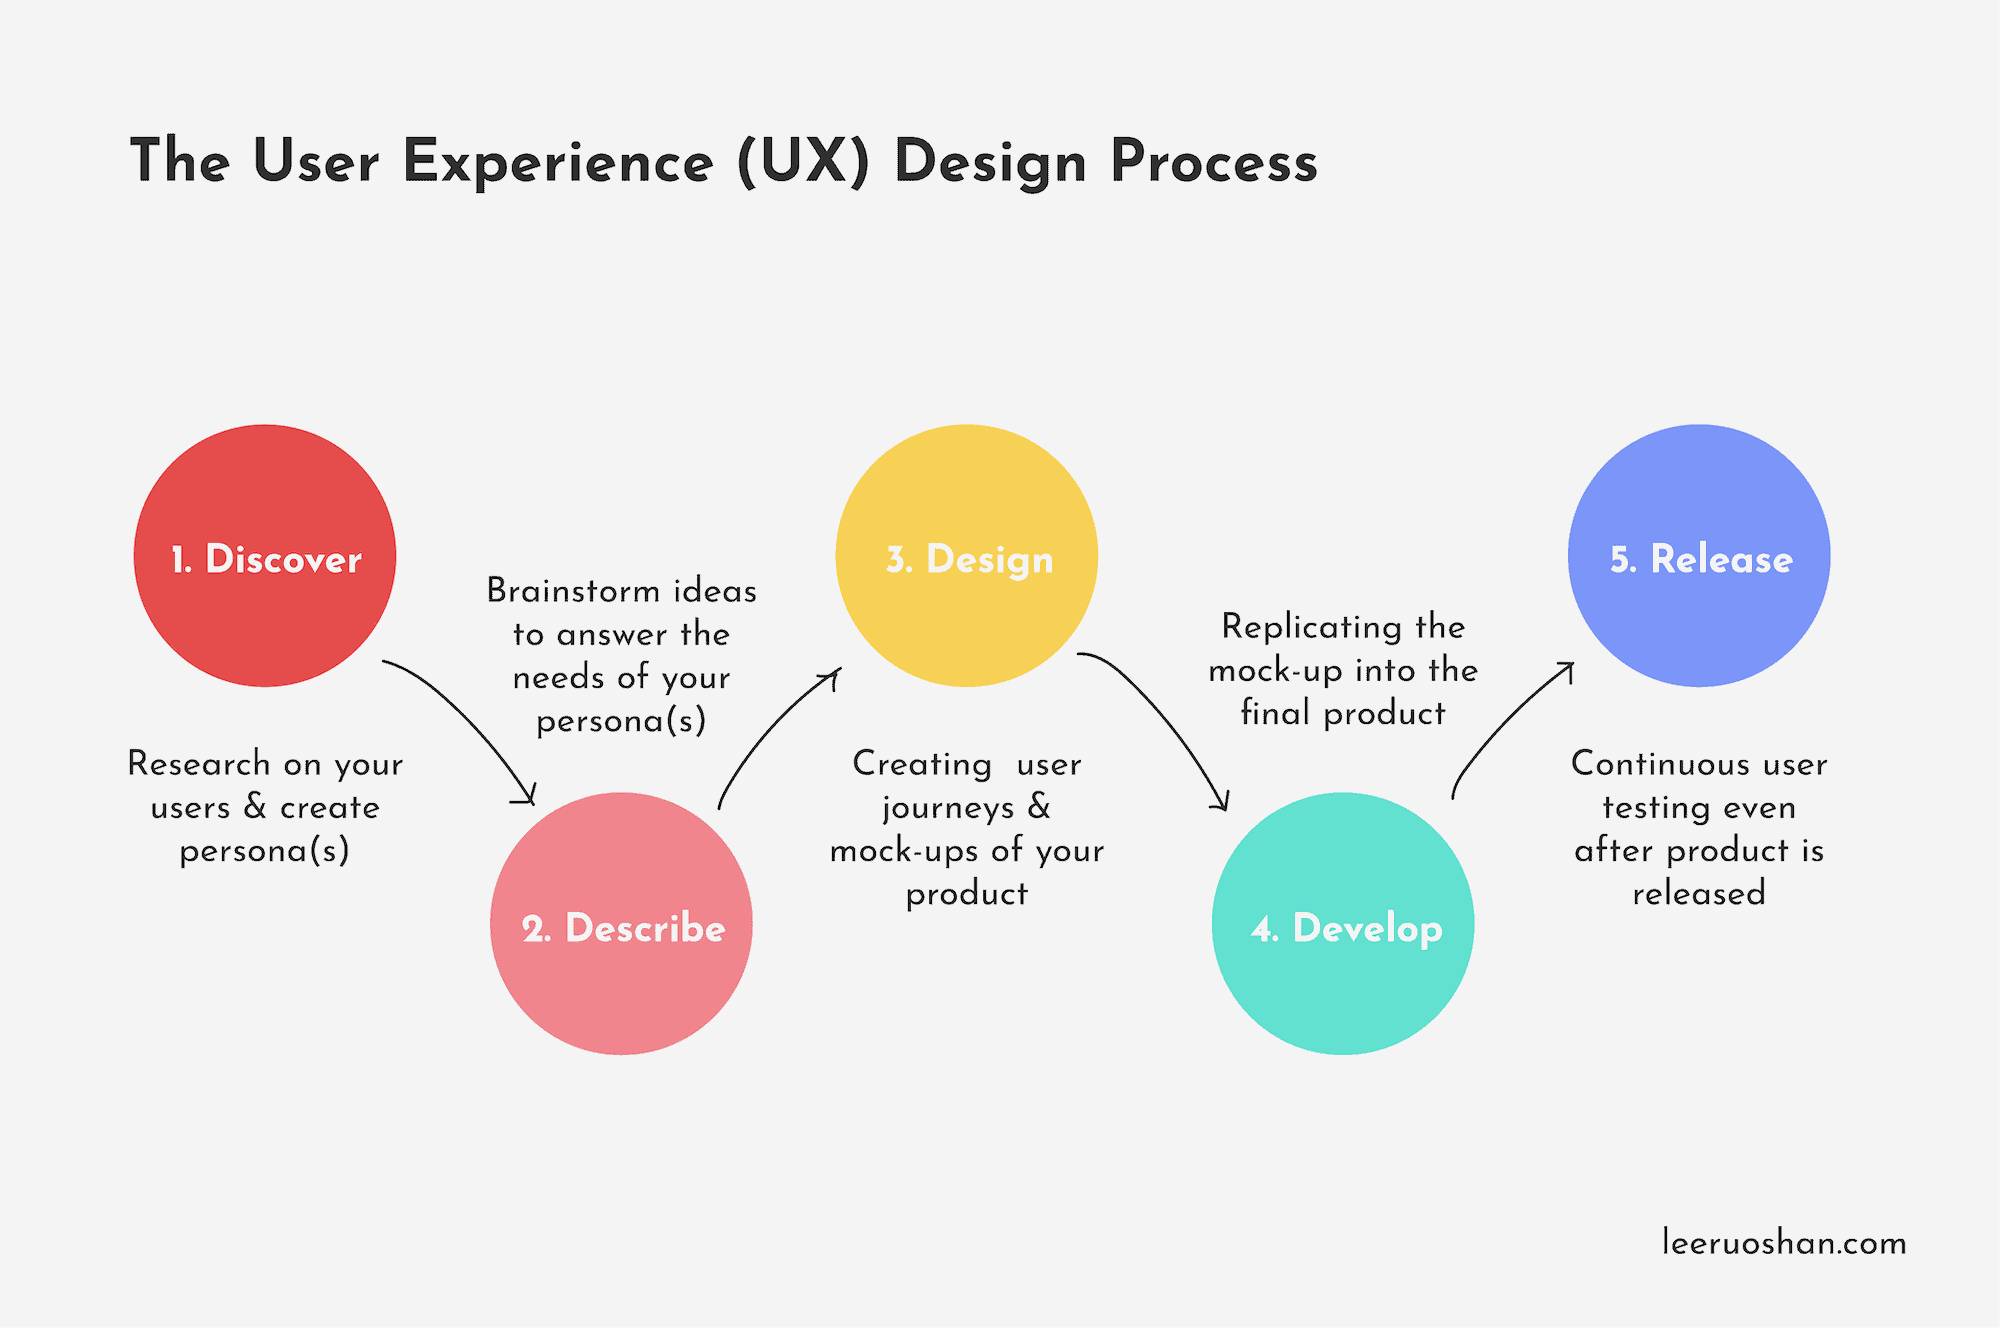 The Fundamentals of User Experience (UX) Design - The UX Design Process